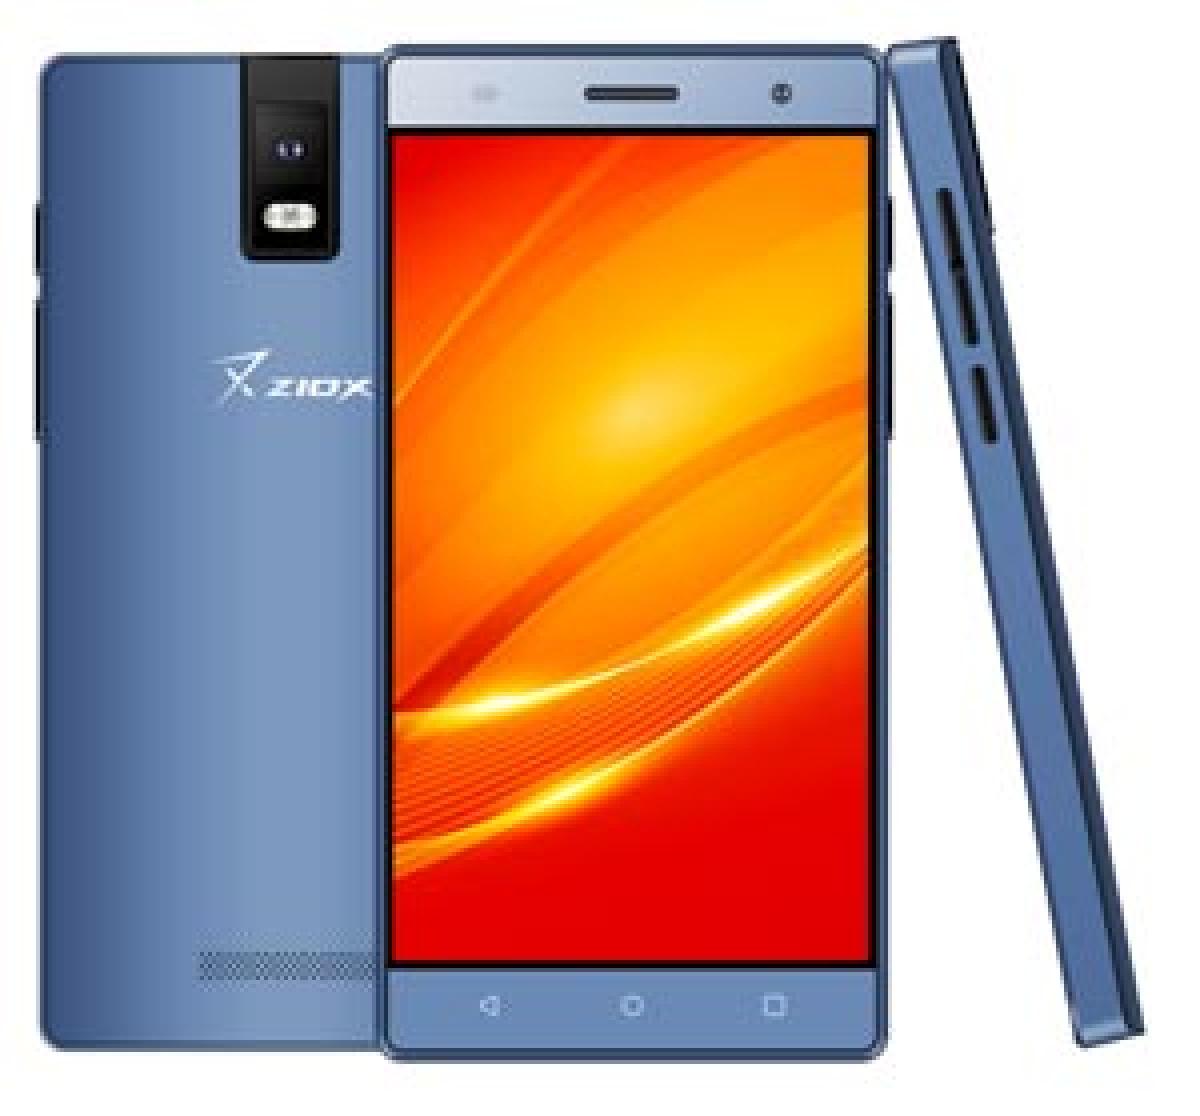 21 Indian languages support in the new Ziox smartphone